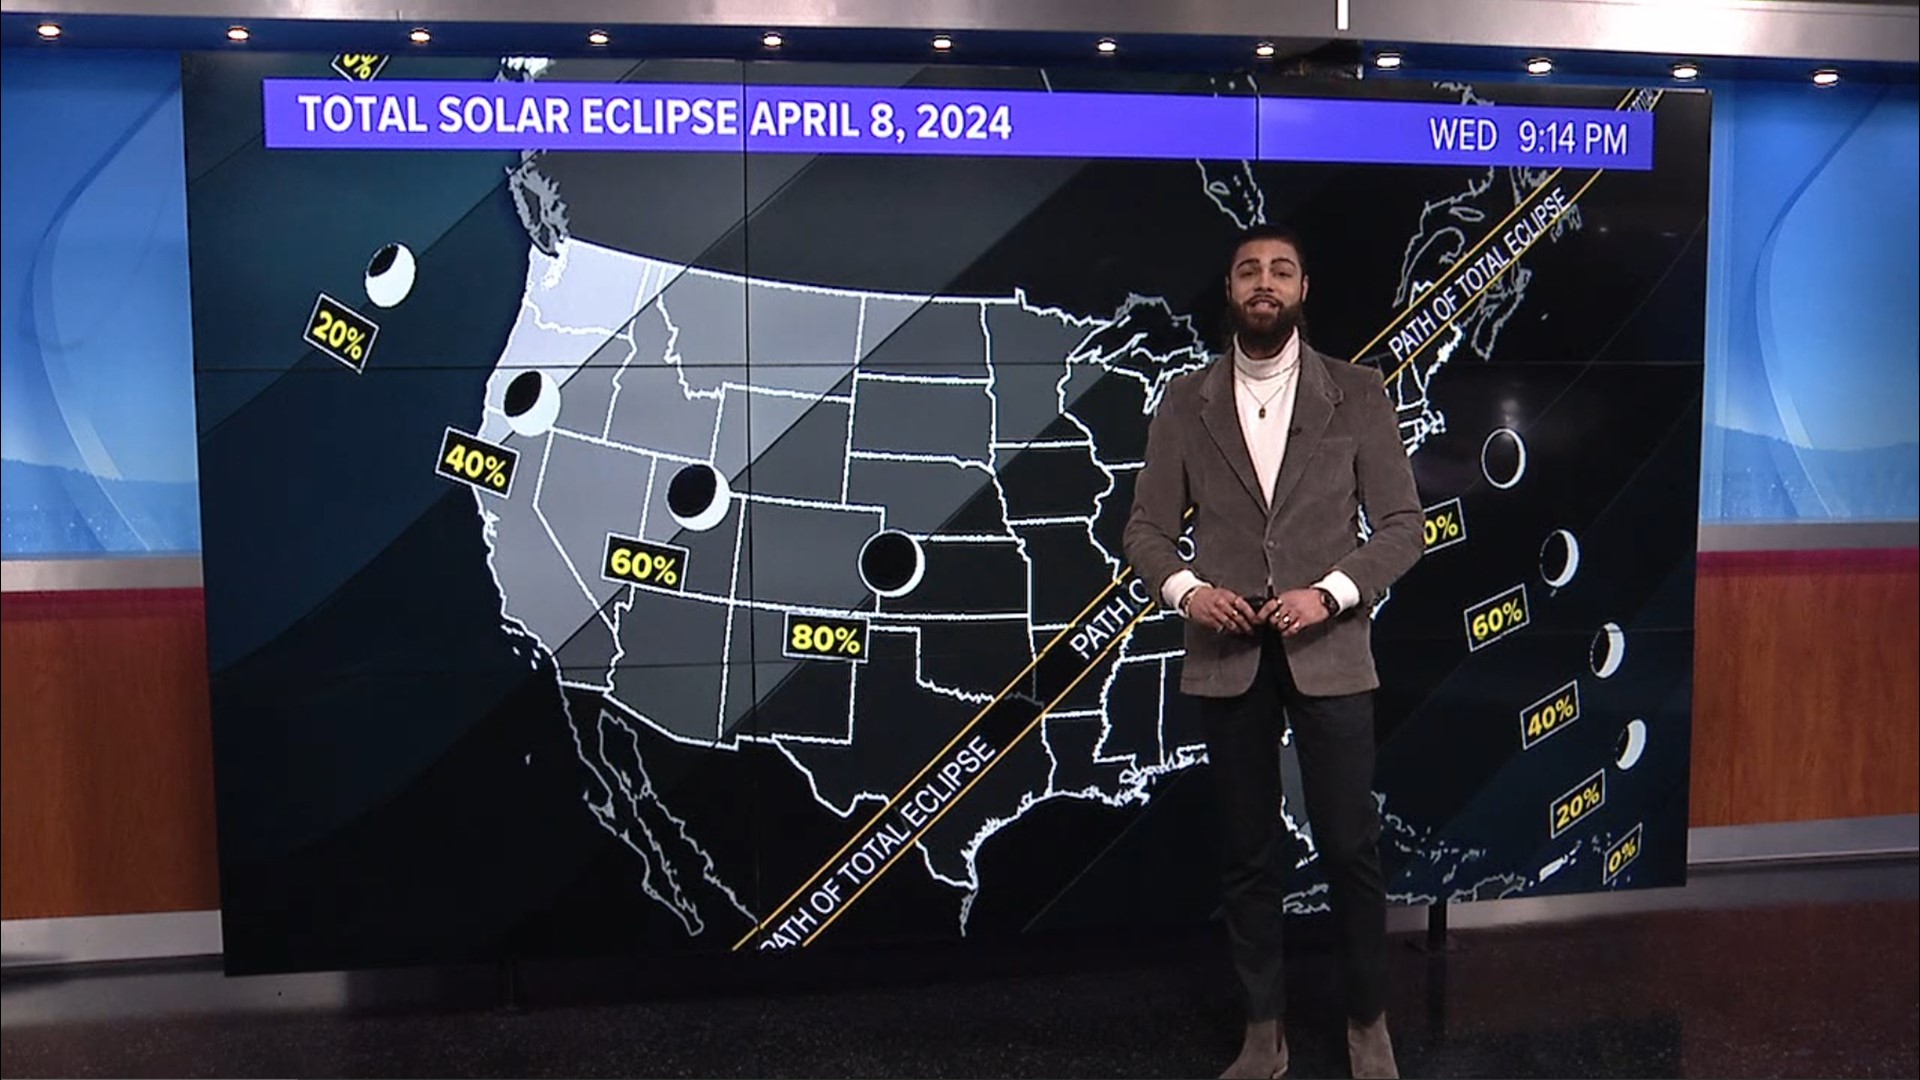 Most of Pennsylvania will experience over 90% totality, and in Scranton, we are just a 2-hour drive from 100% coverage. Meteorologist Jeremy Lewan explains.